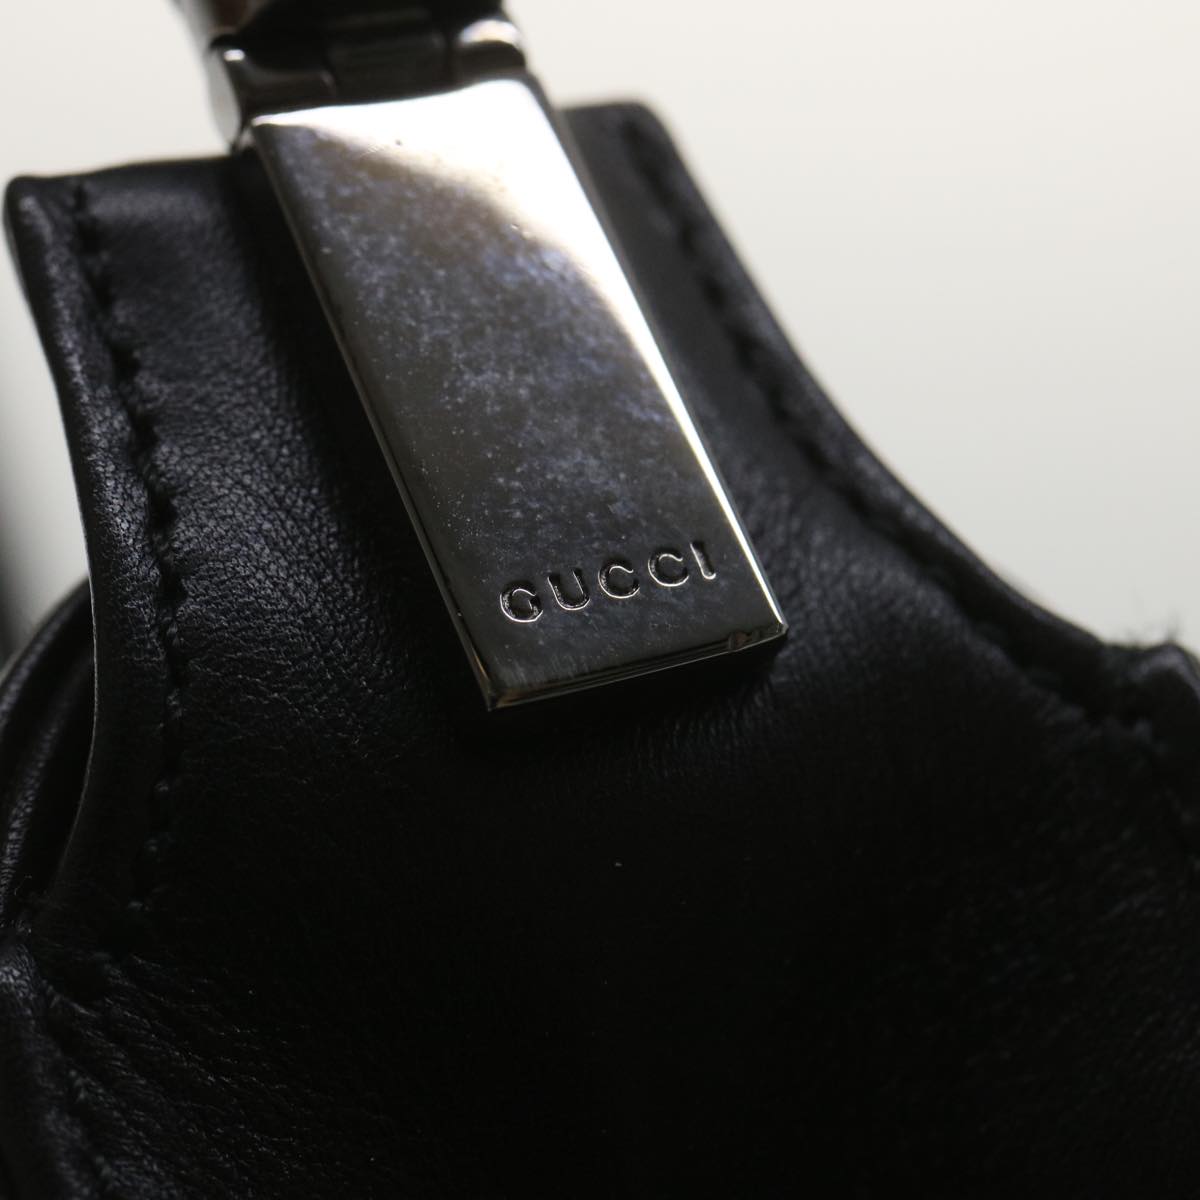 GUCCI Bamboo Shoulder Bag Leather Black 001 3239 001998 Auth am3859